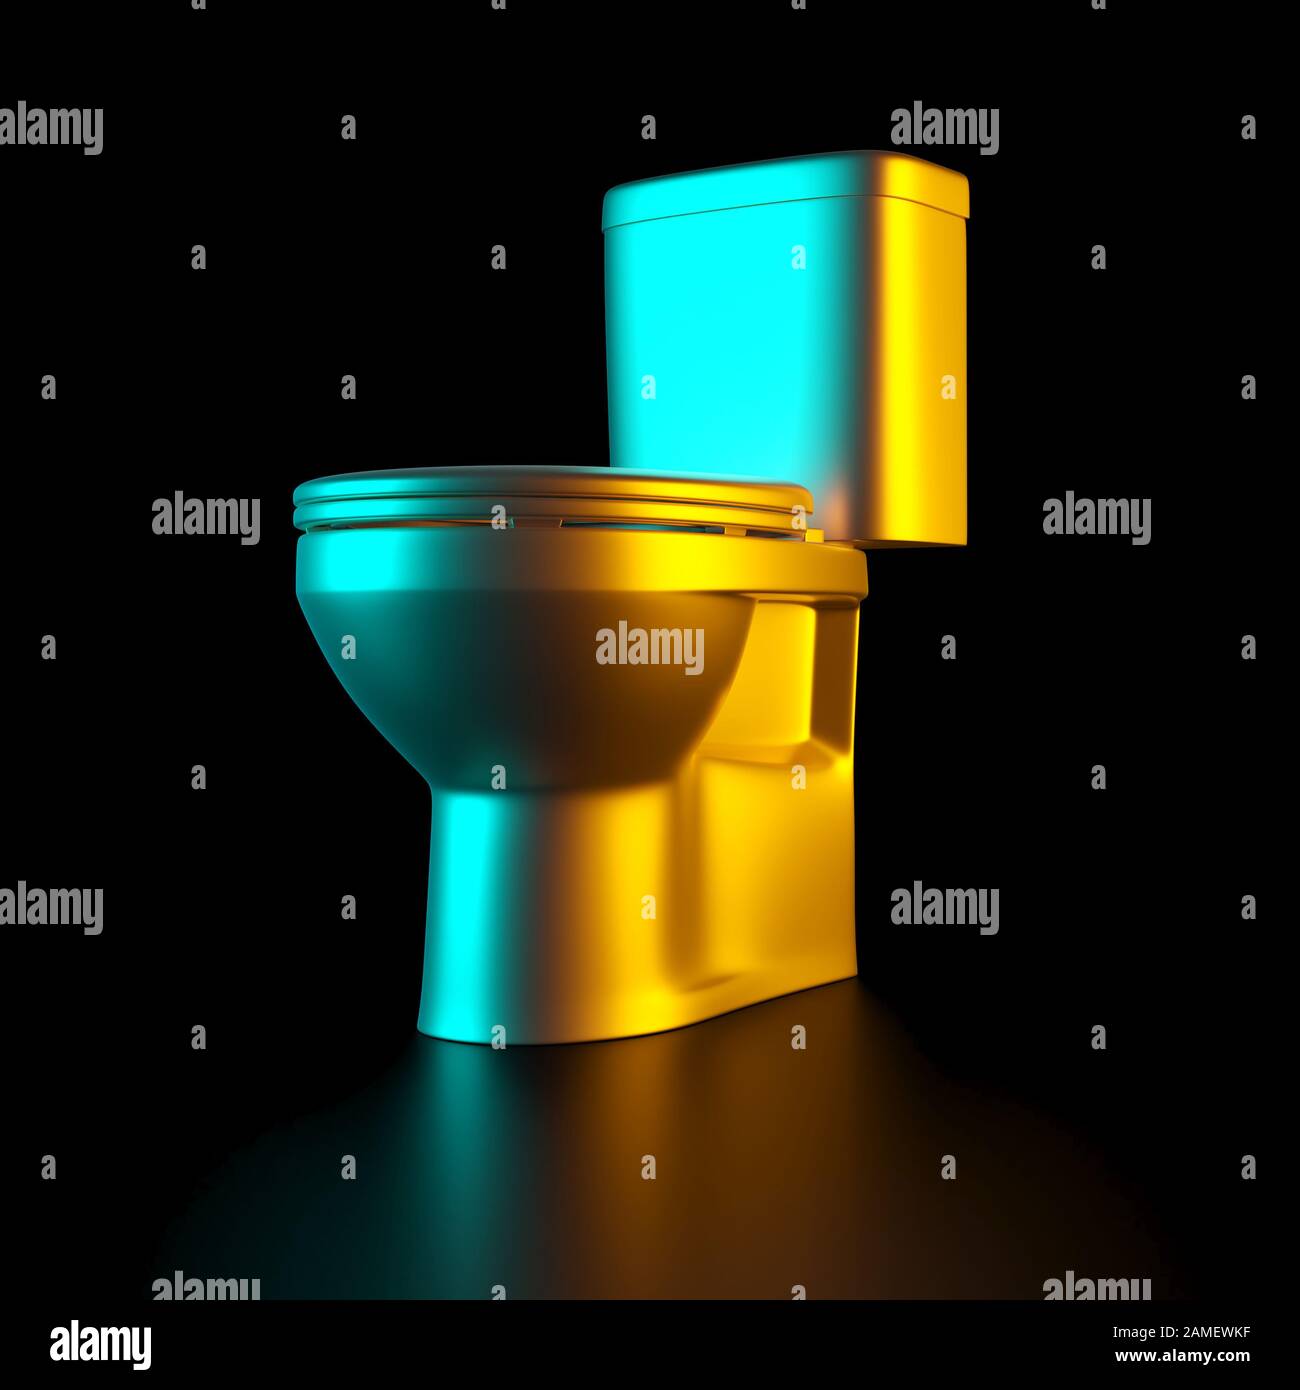 gold toilet bowl on a black background. Concept of luxury and exclusivity. nobody around. 3d render image. Stock Photo